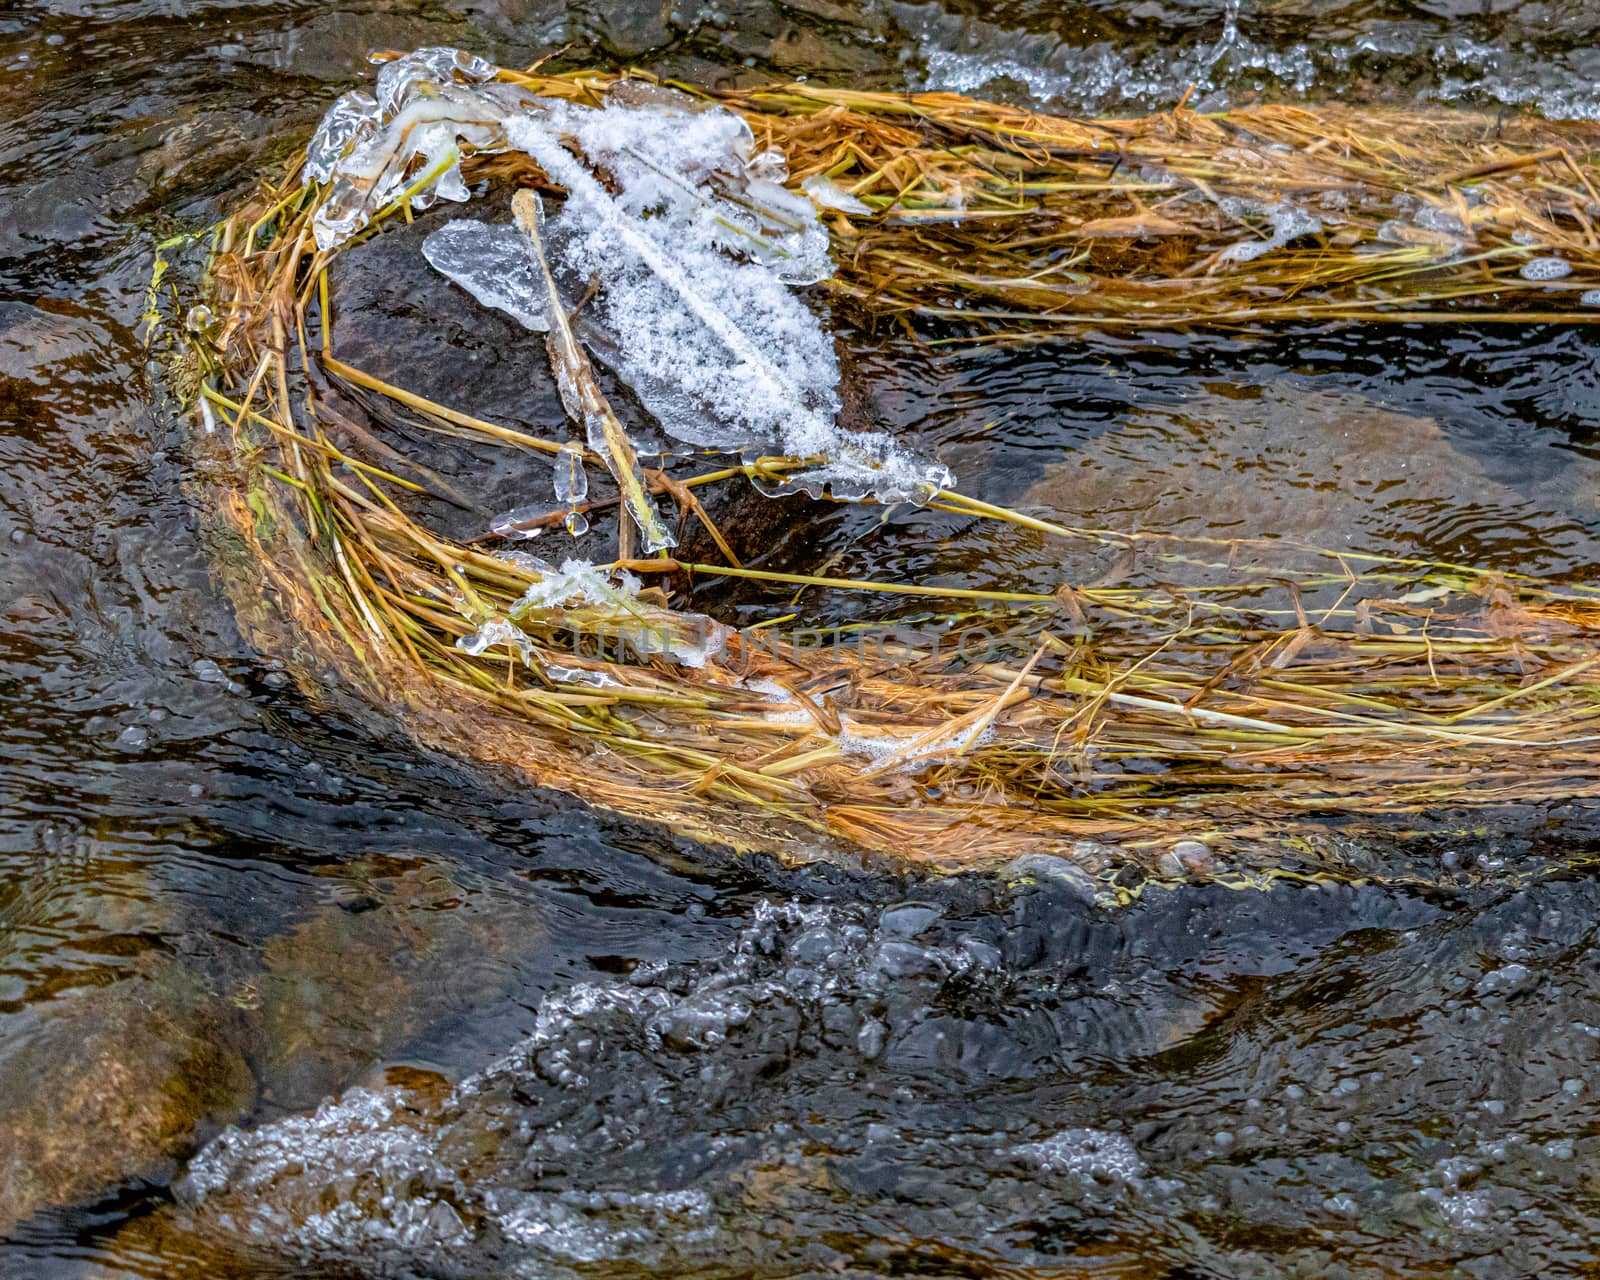 Weeds trapped on an icy rock in the stream by colintemple